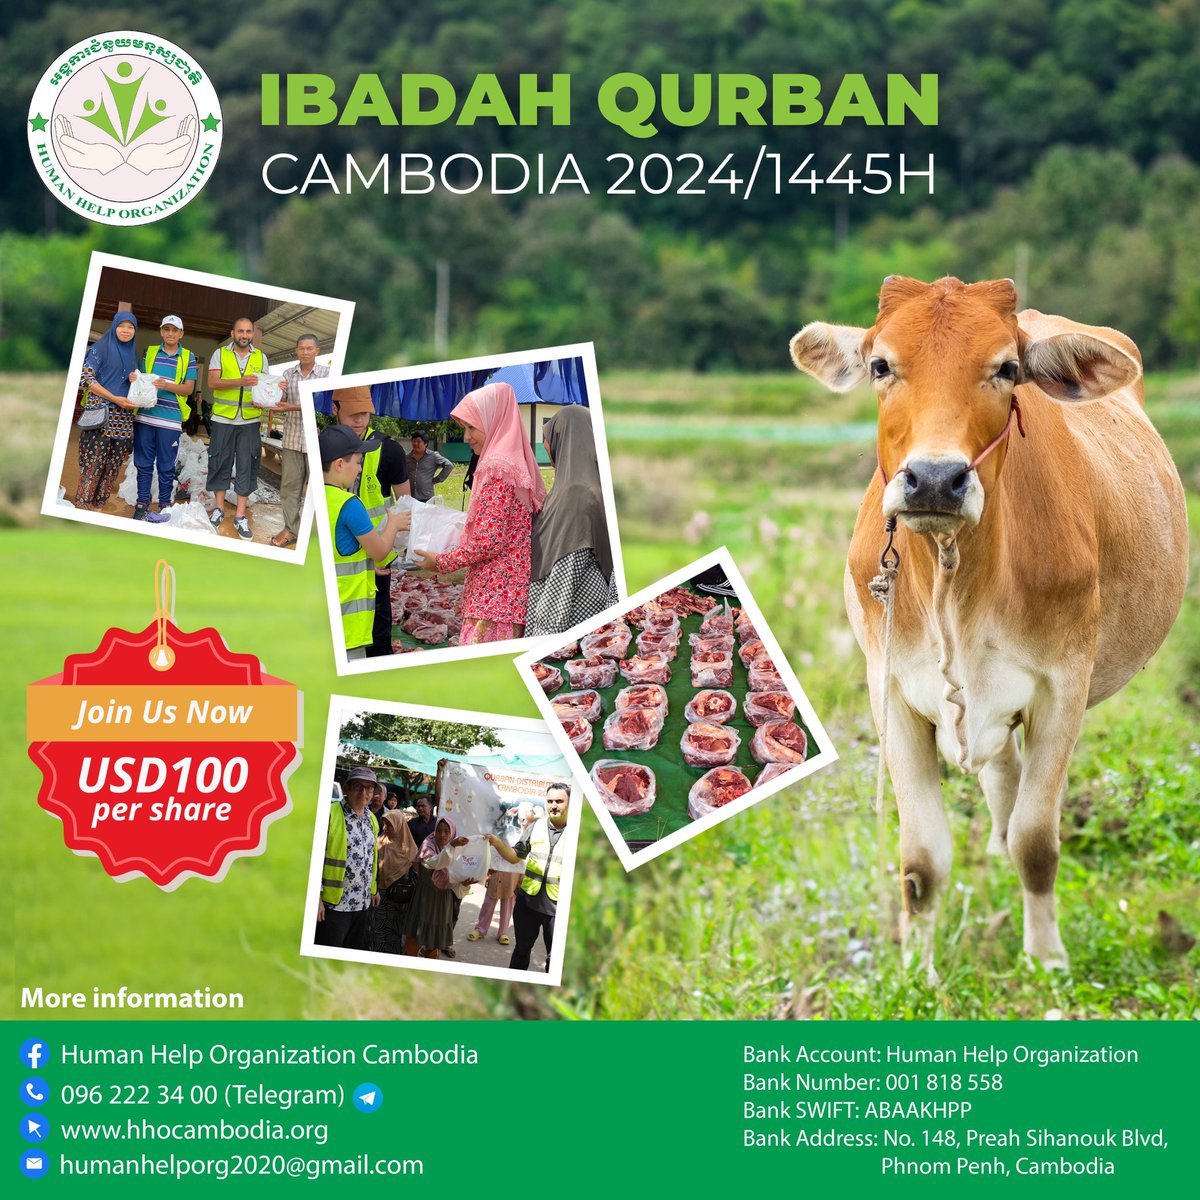 Ibadah Qurban Cambodia 2024/1445H 

Join us now for USD100 per share! This Eid al-Adha, contribute to a meaningful cause and support our local communities in Cambodia. Your participation will help provide meat donations and aid to those in need.